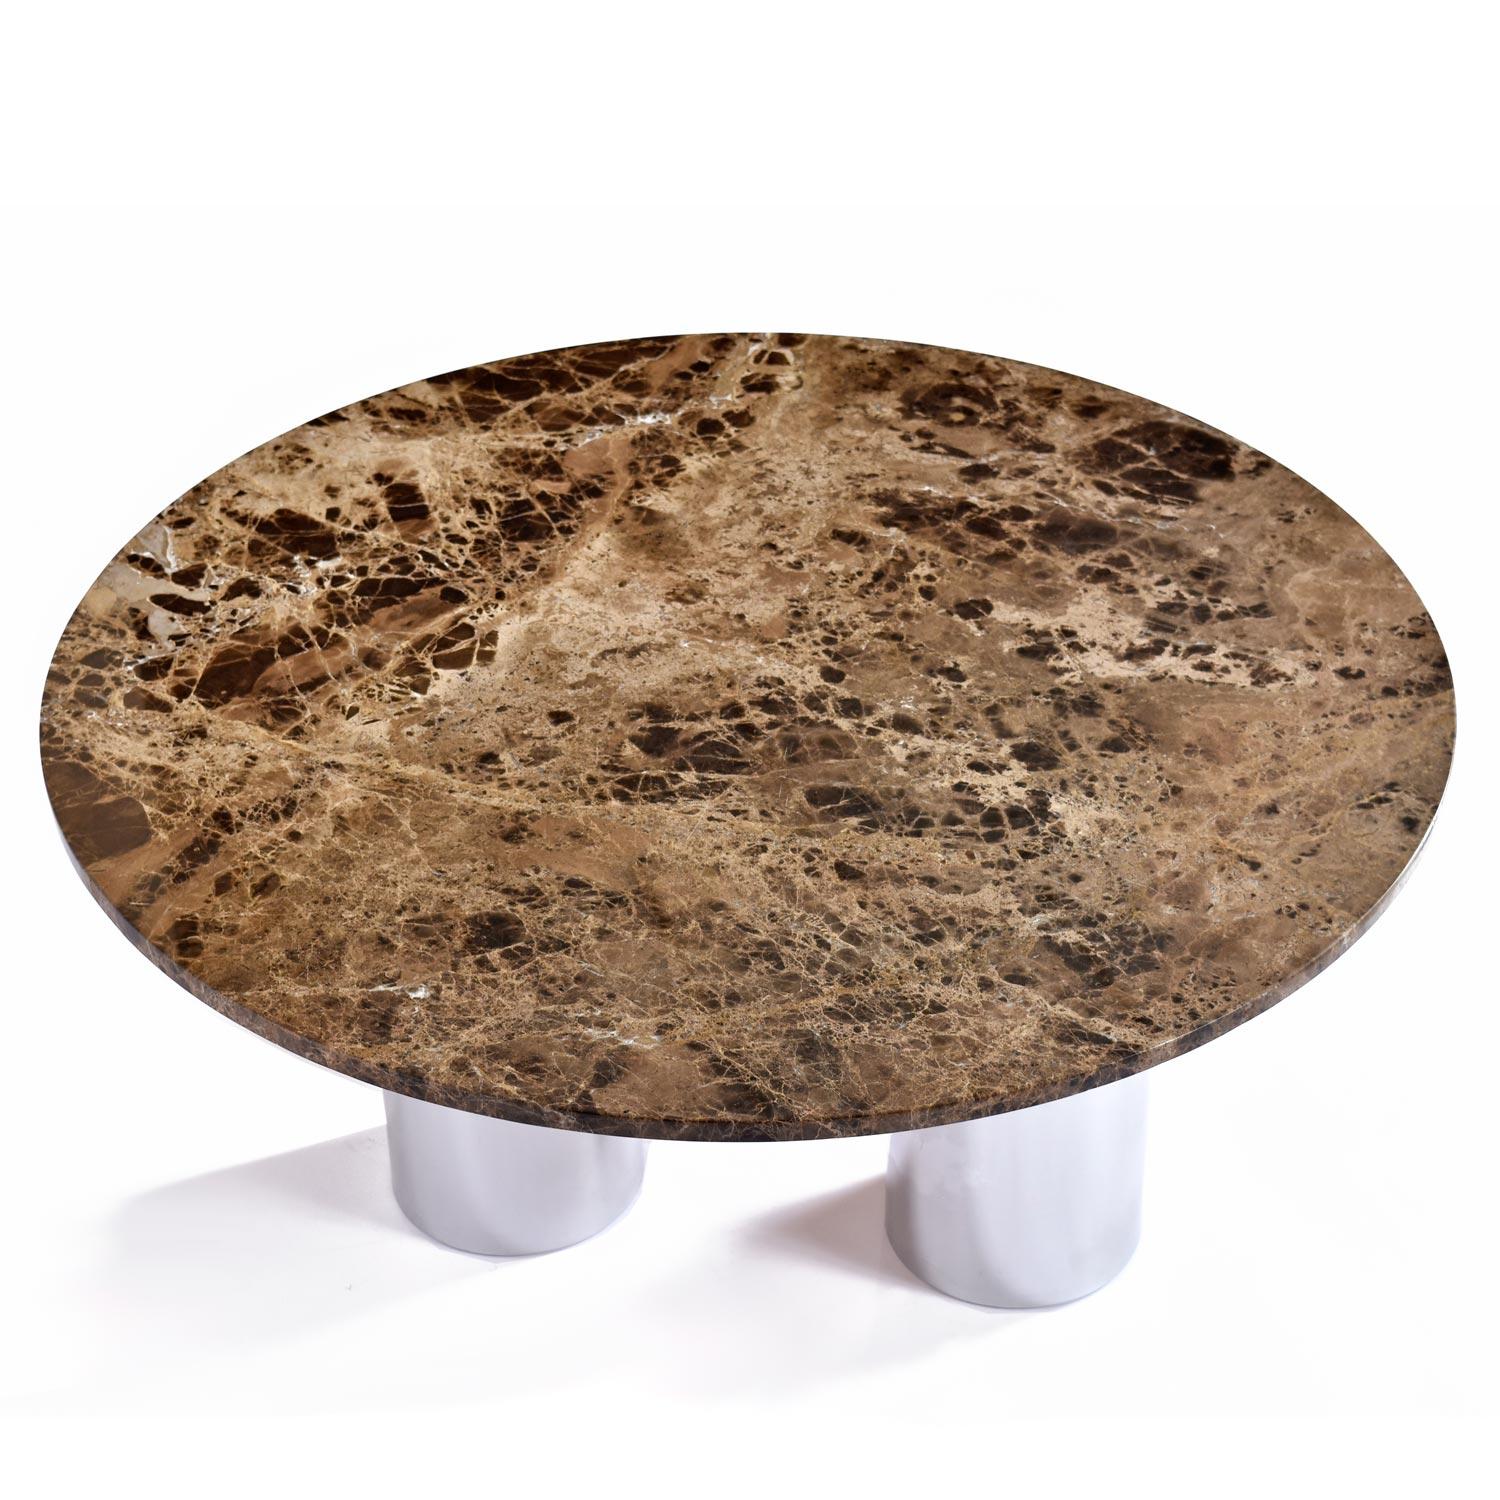 Post-Modern 1970's Stainless Steel Tubular Pedestal Round Marble Coffee Table